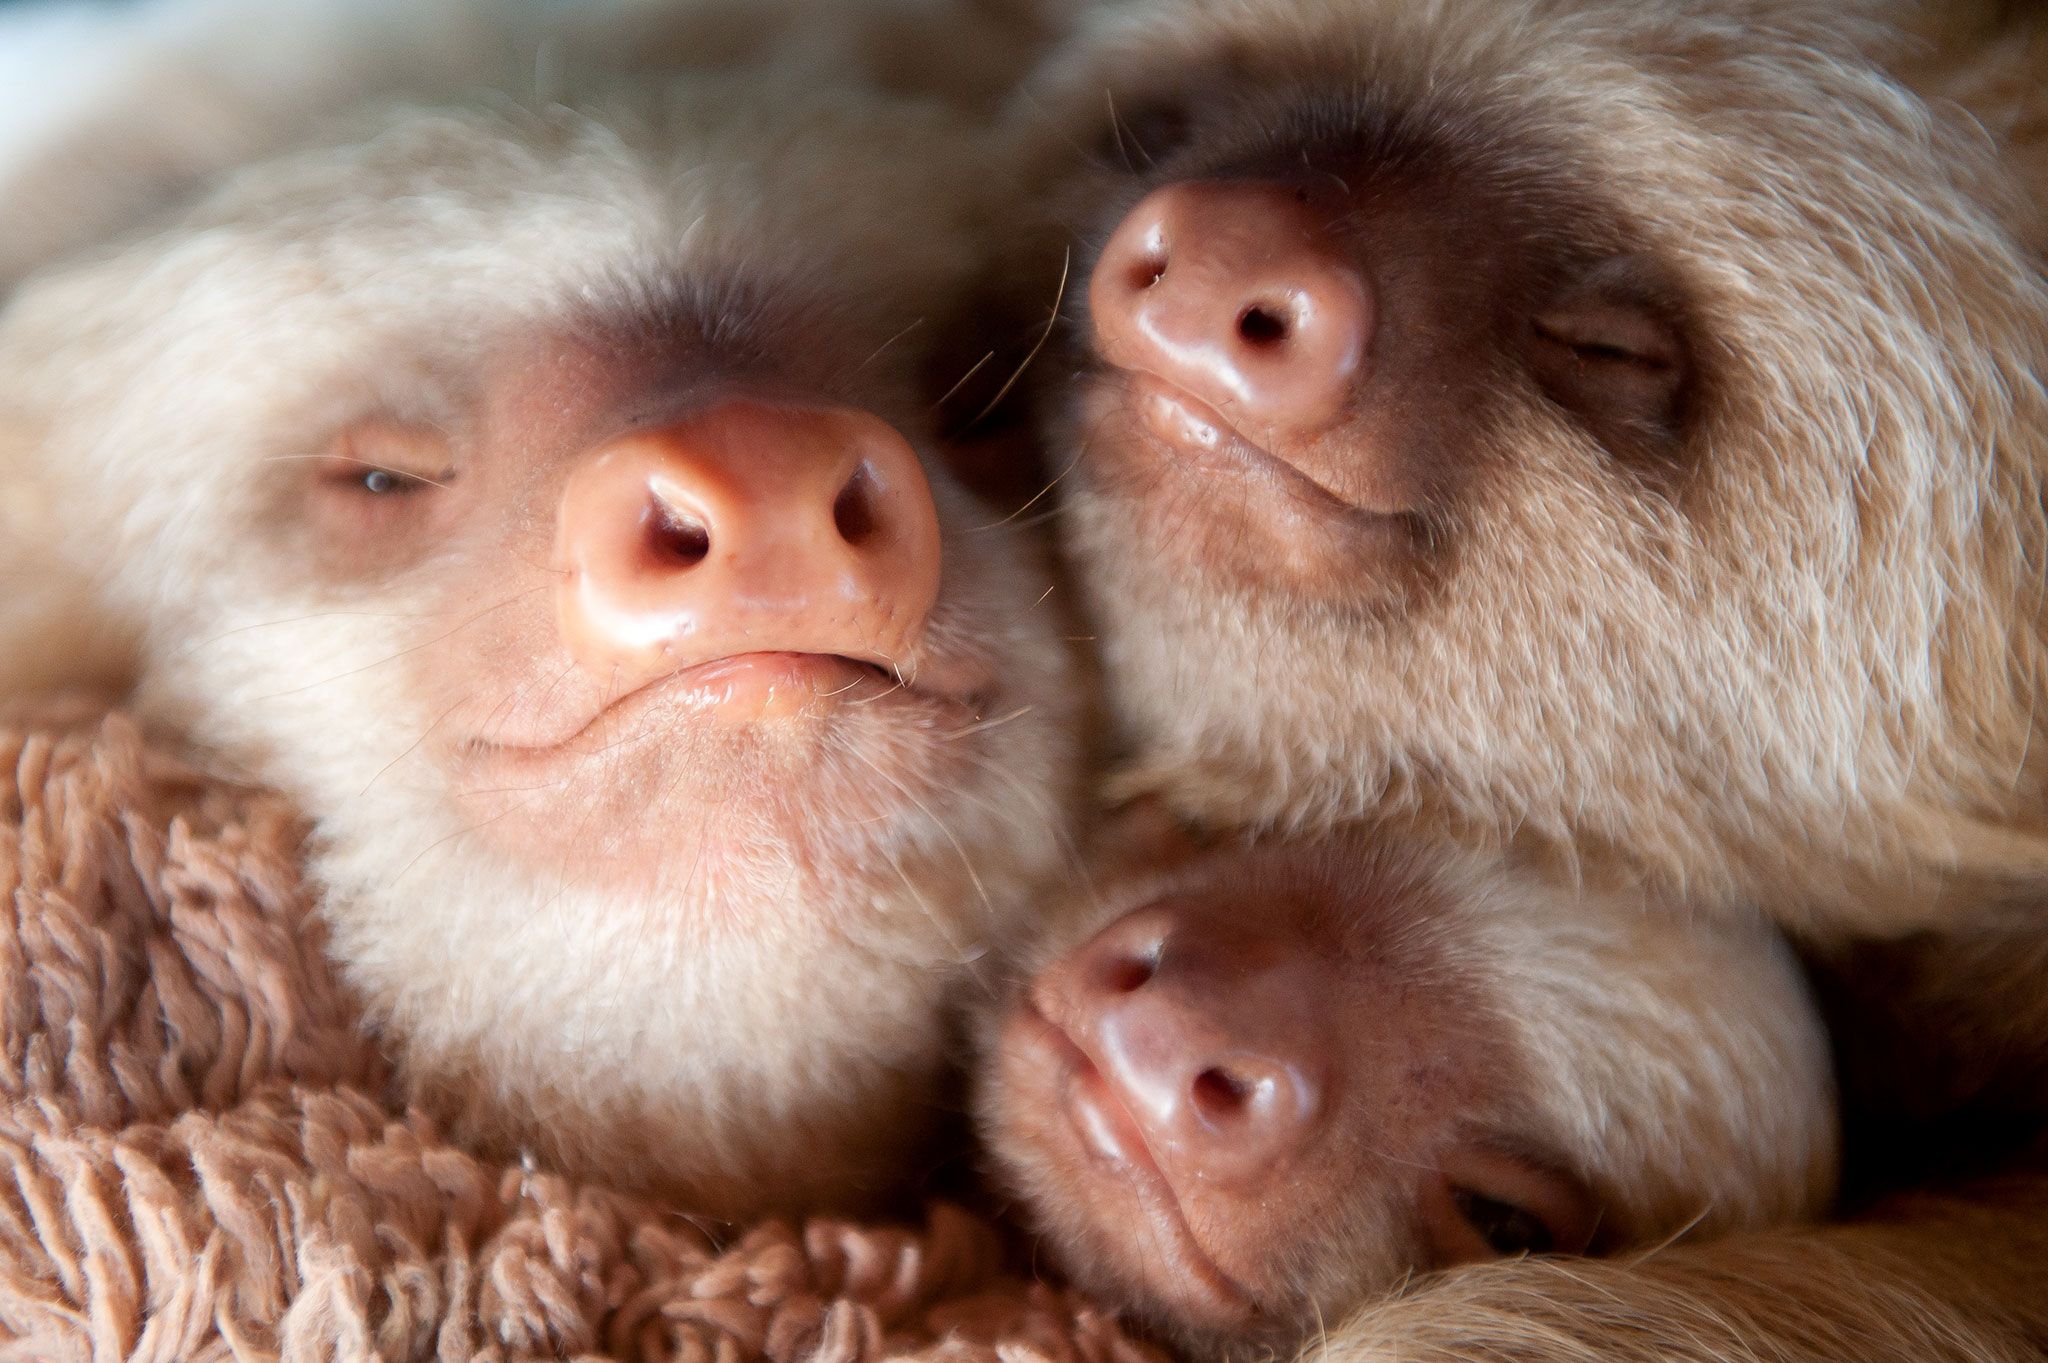 Unbelievably Cute Picture of Rescued Baby Sloths